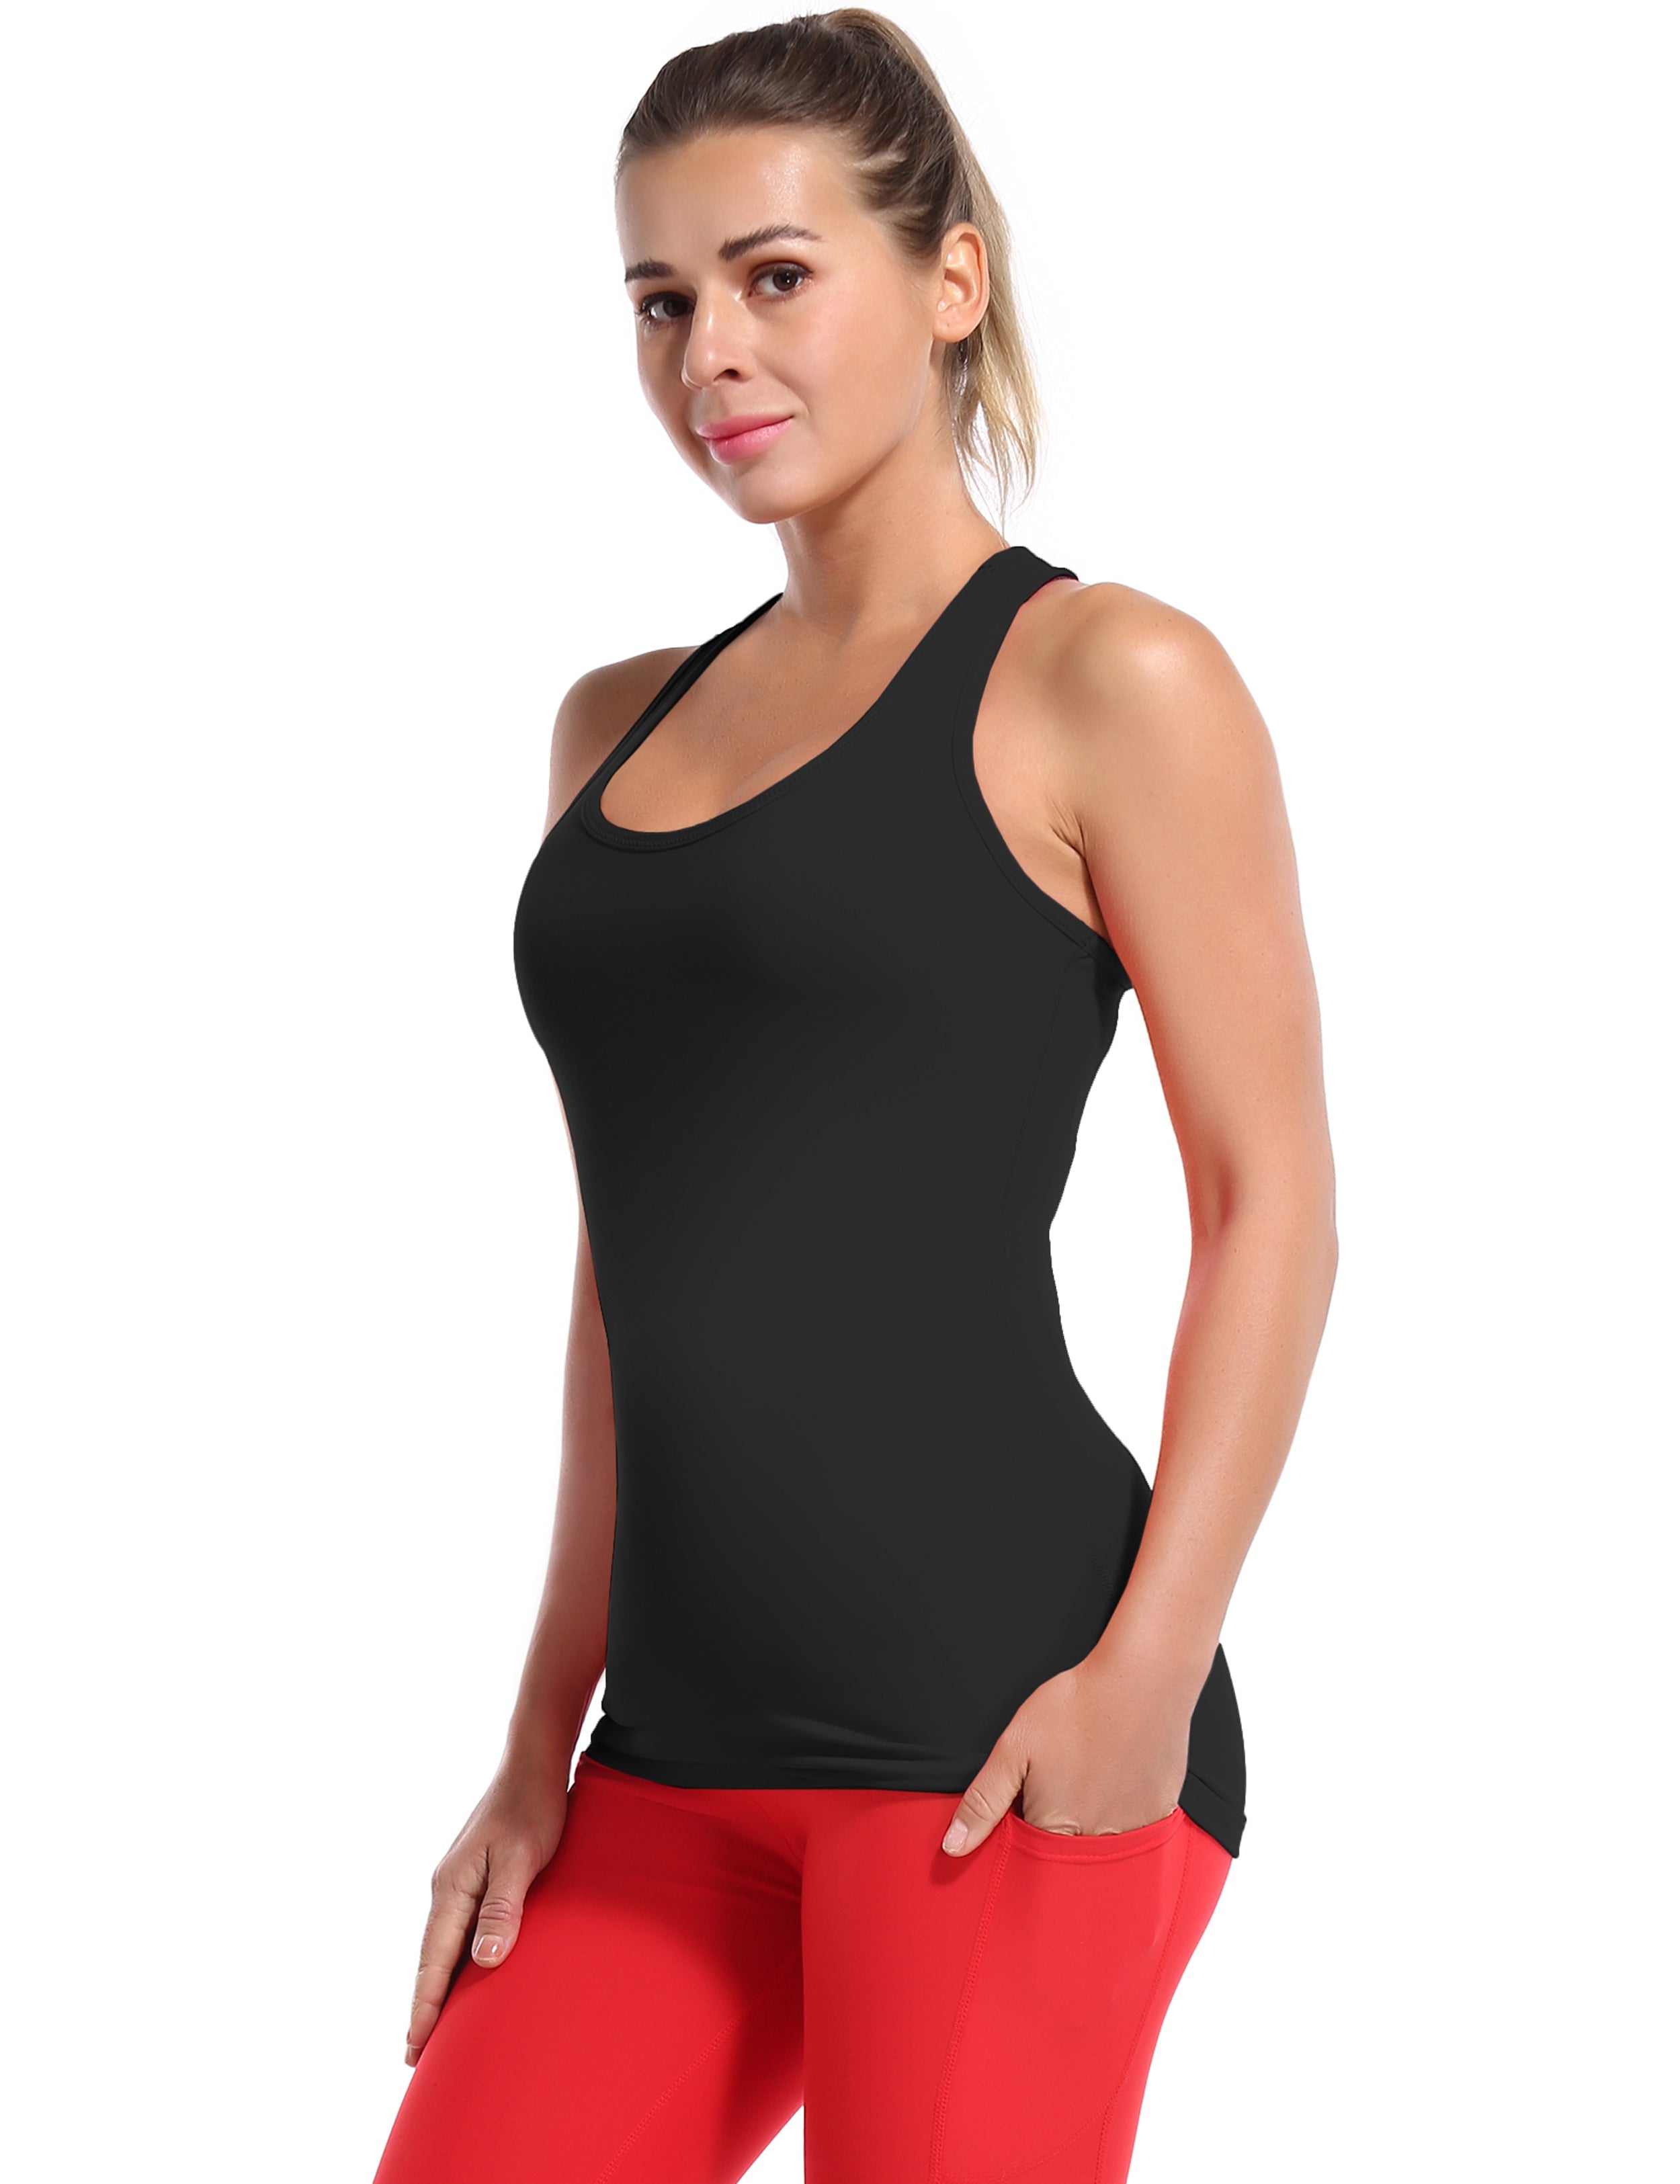 Racerback Athletic Tank Tops black 92%Nylon/8%Spandex(Cotton Soft) Designed for Pilates Tight Fit So buttery soft, it feels weightless Sweat-wicking Four-way stretch Breathable Contours your body Sits below the waistband for moderate, everyday coverage